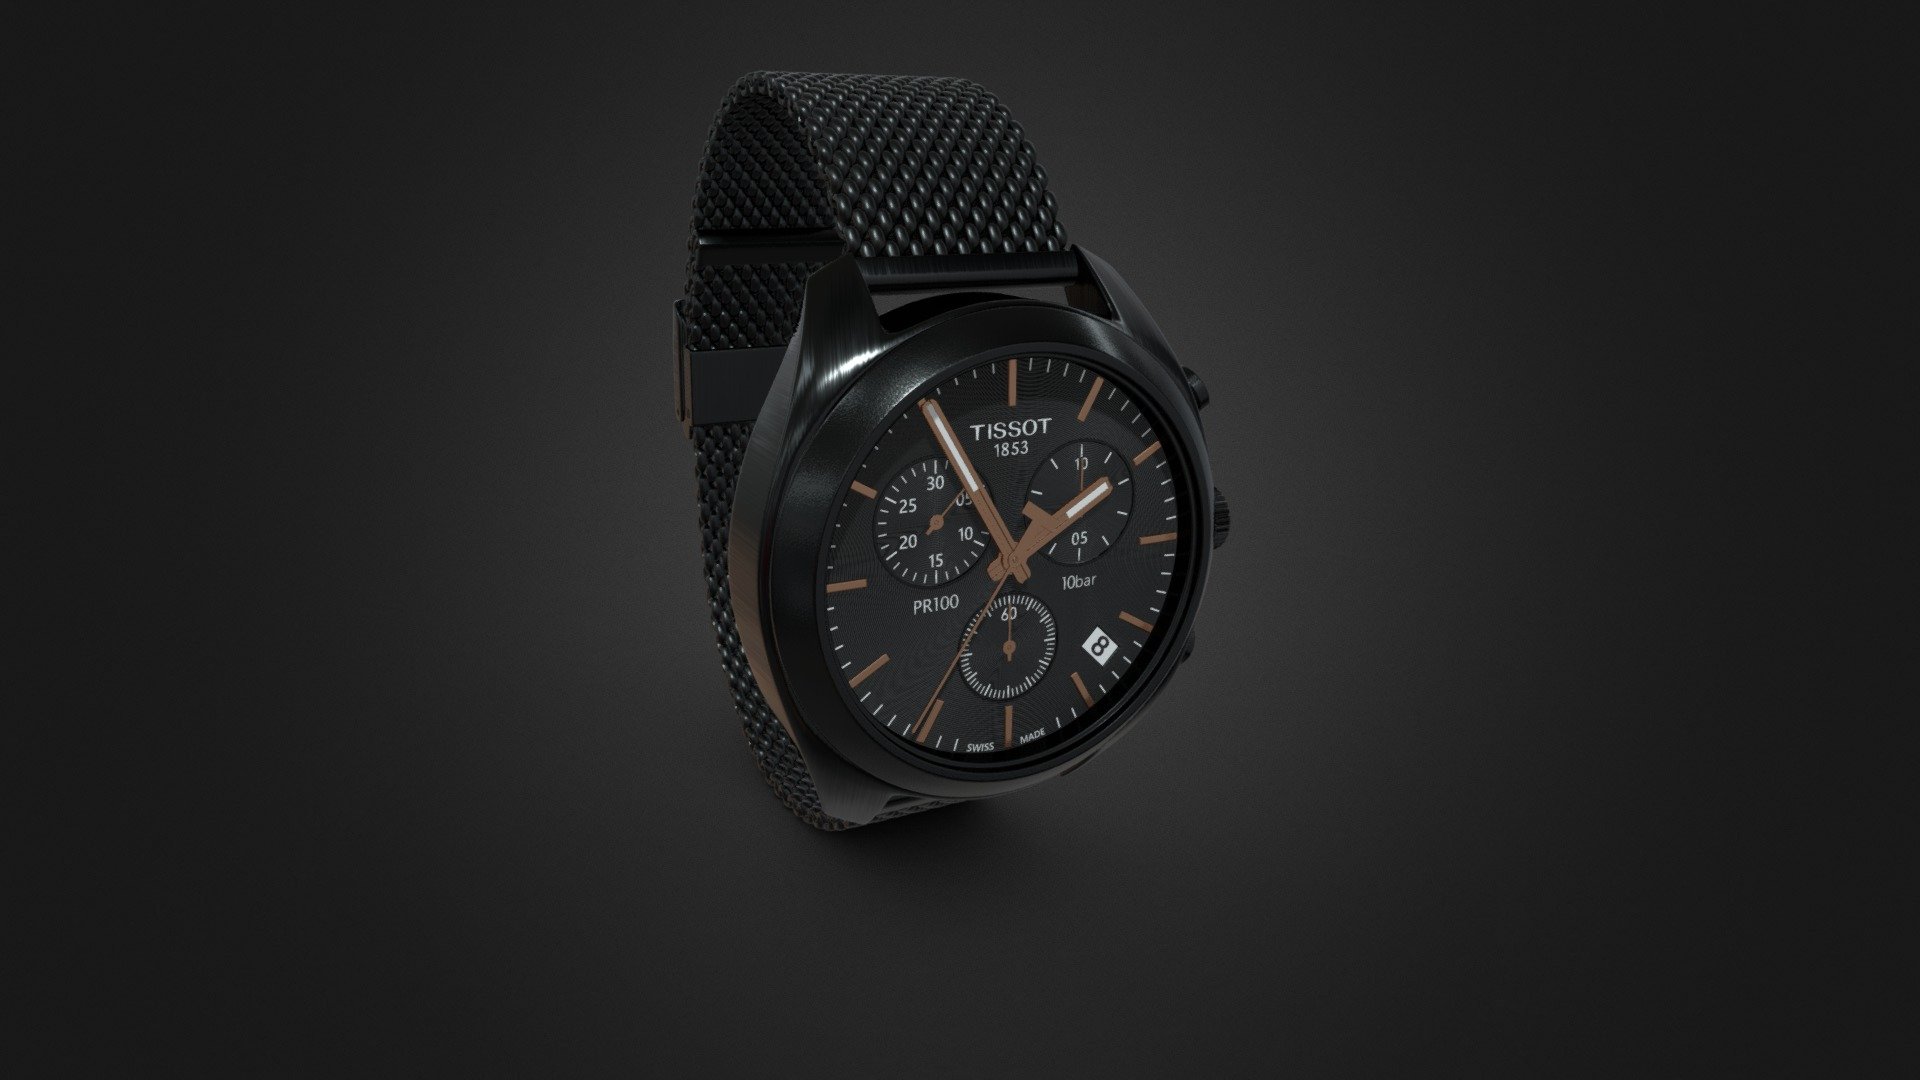 3d model of a PR 100 Chronograph Watch.
Best use for adding detail on your Architectural Visualization or Interior Design.
This product is made in Blender and ready to render in Evee. Unit setup is metres and the models are scaled to match real life objects.
The model comes with textures and materials and is positioned in the center of the coordinates system.
No additional plugin is needed to open the model.

Notes:

Geometry: Polygonal

Textures: Yes

Rigged: No

Animated: No

UV Mapped: Yes

Unwrapped UVs: Yes, non-overlapping

Bake all map

Hope you like it! Thank you!

My youtube channel : https://www.youtube.com/toss90 - PR 100 Chronograph Watch - Buy Royalty Free 3D model by Toss90 3d model